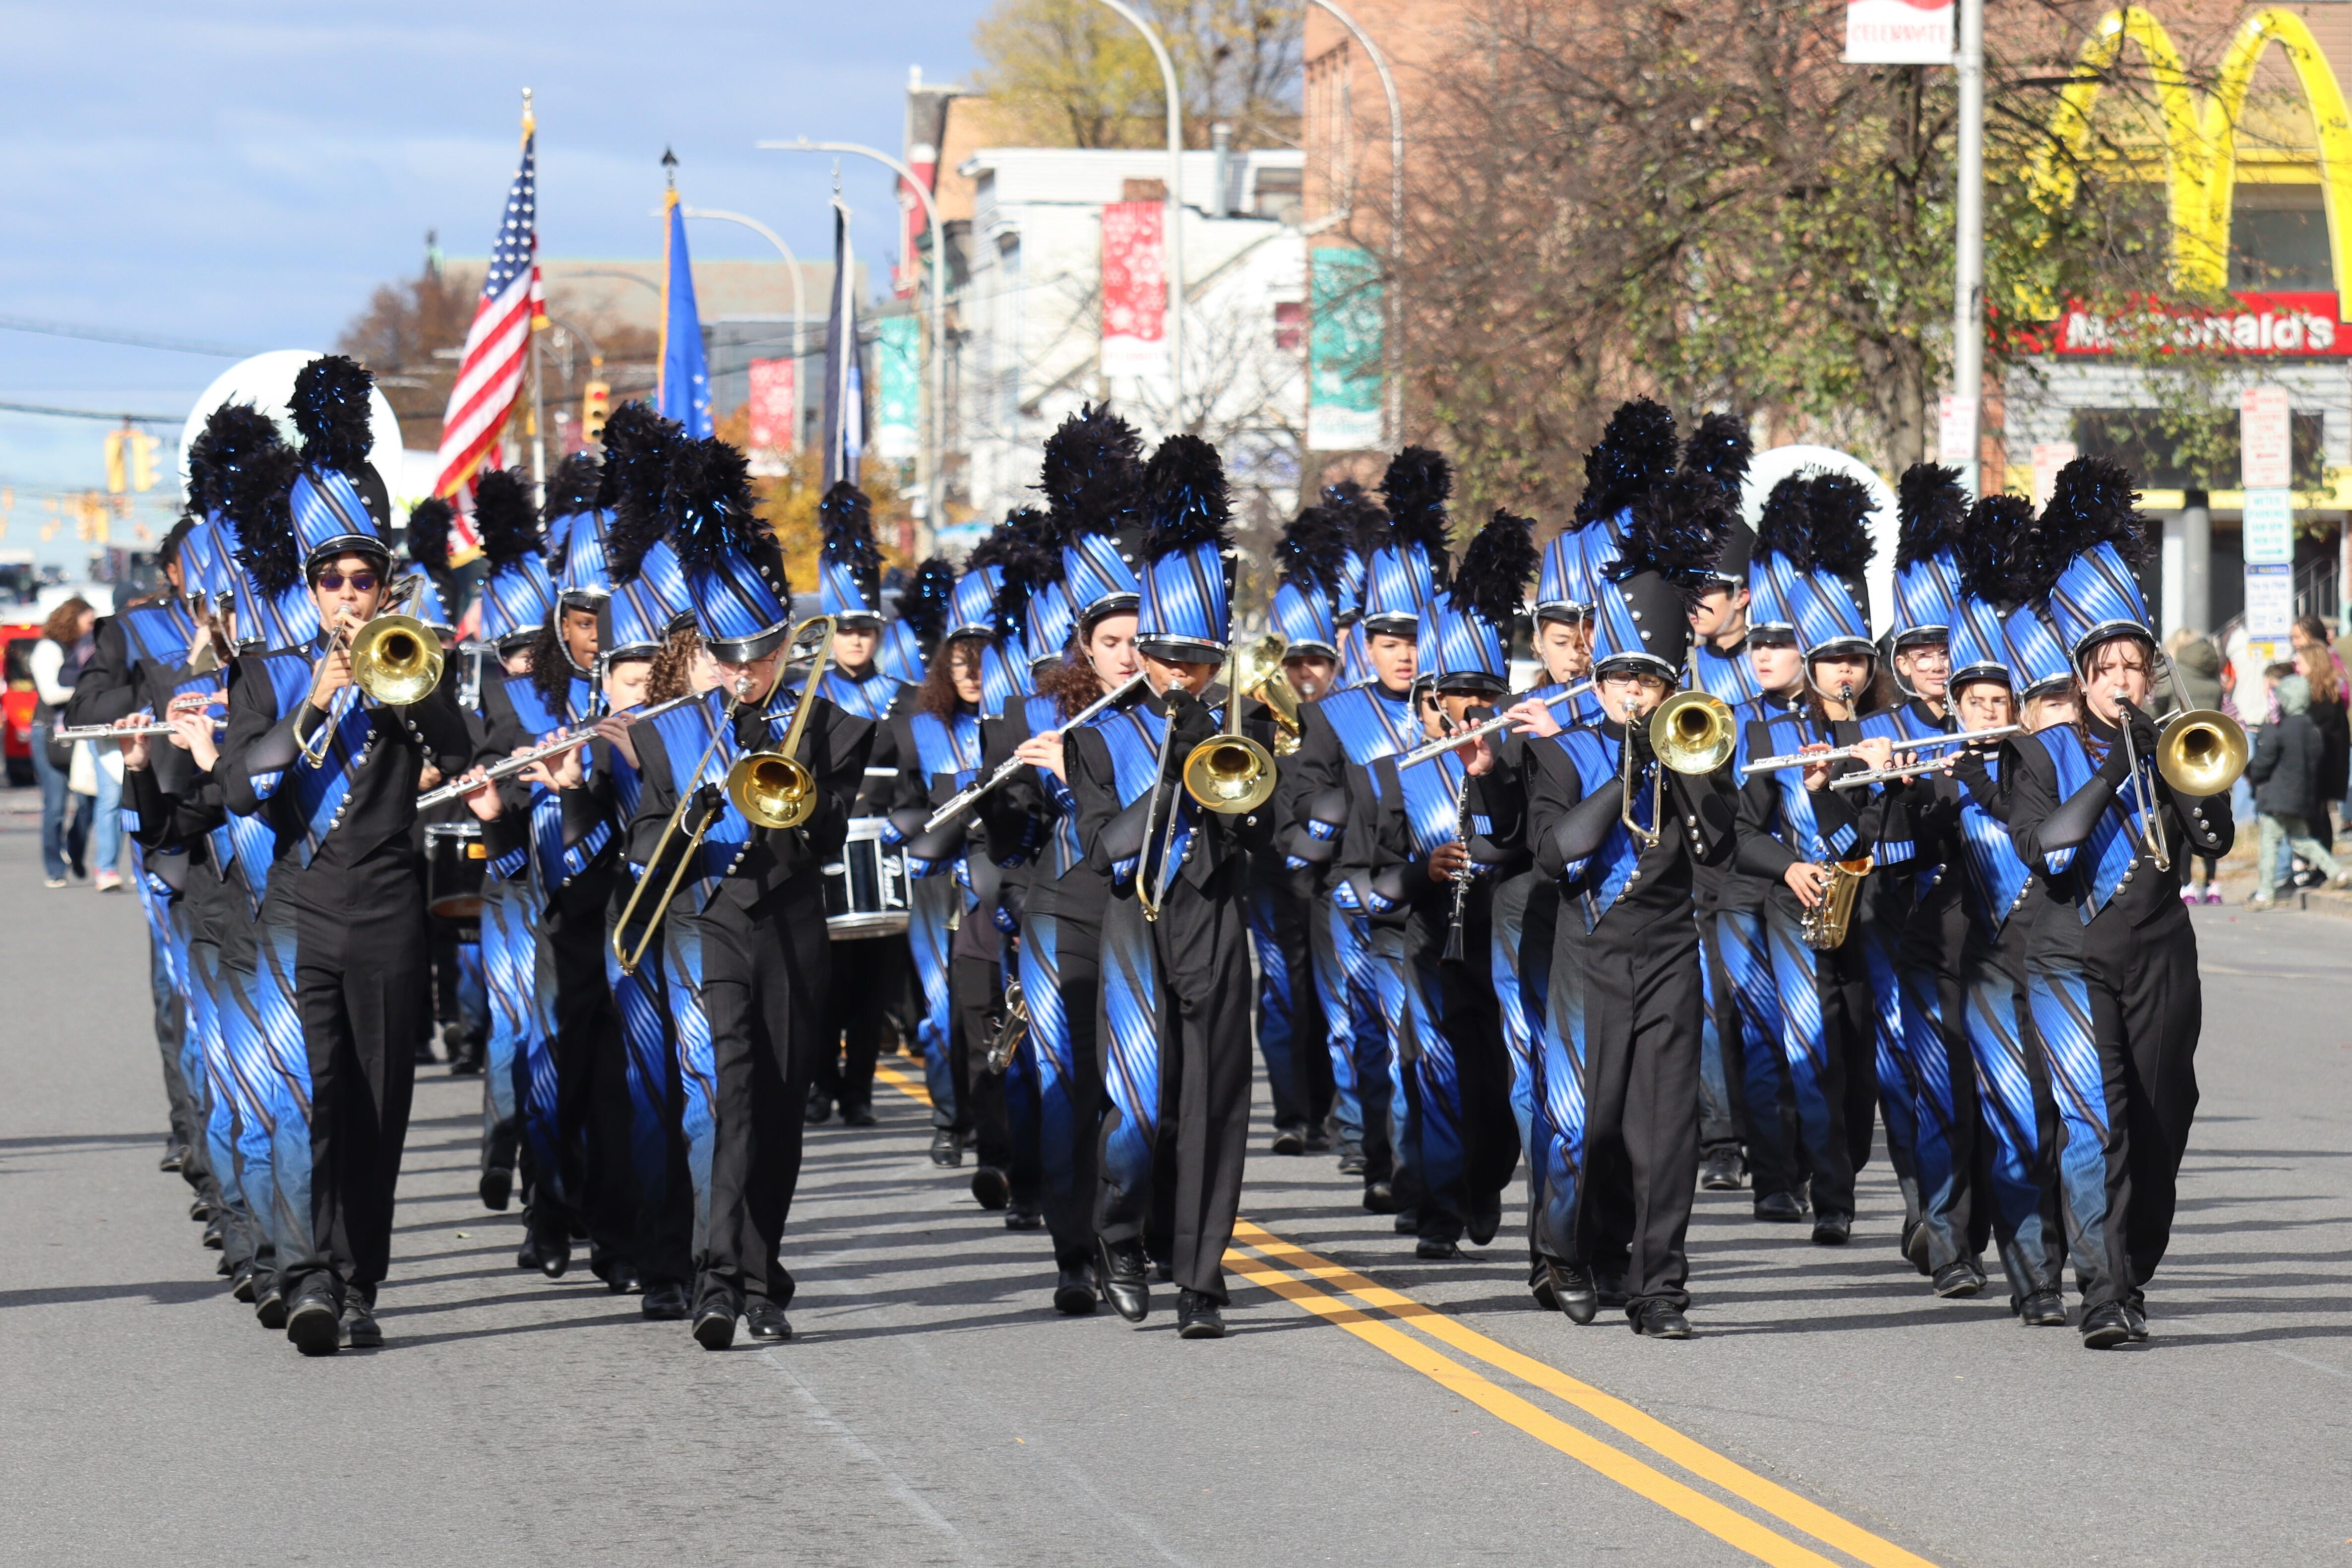 Marching Falcons in action